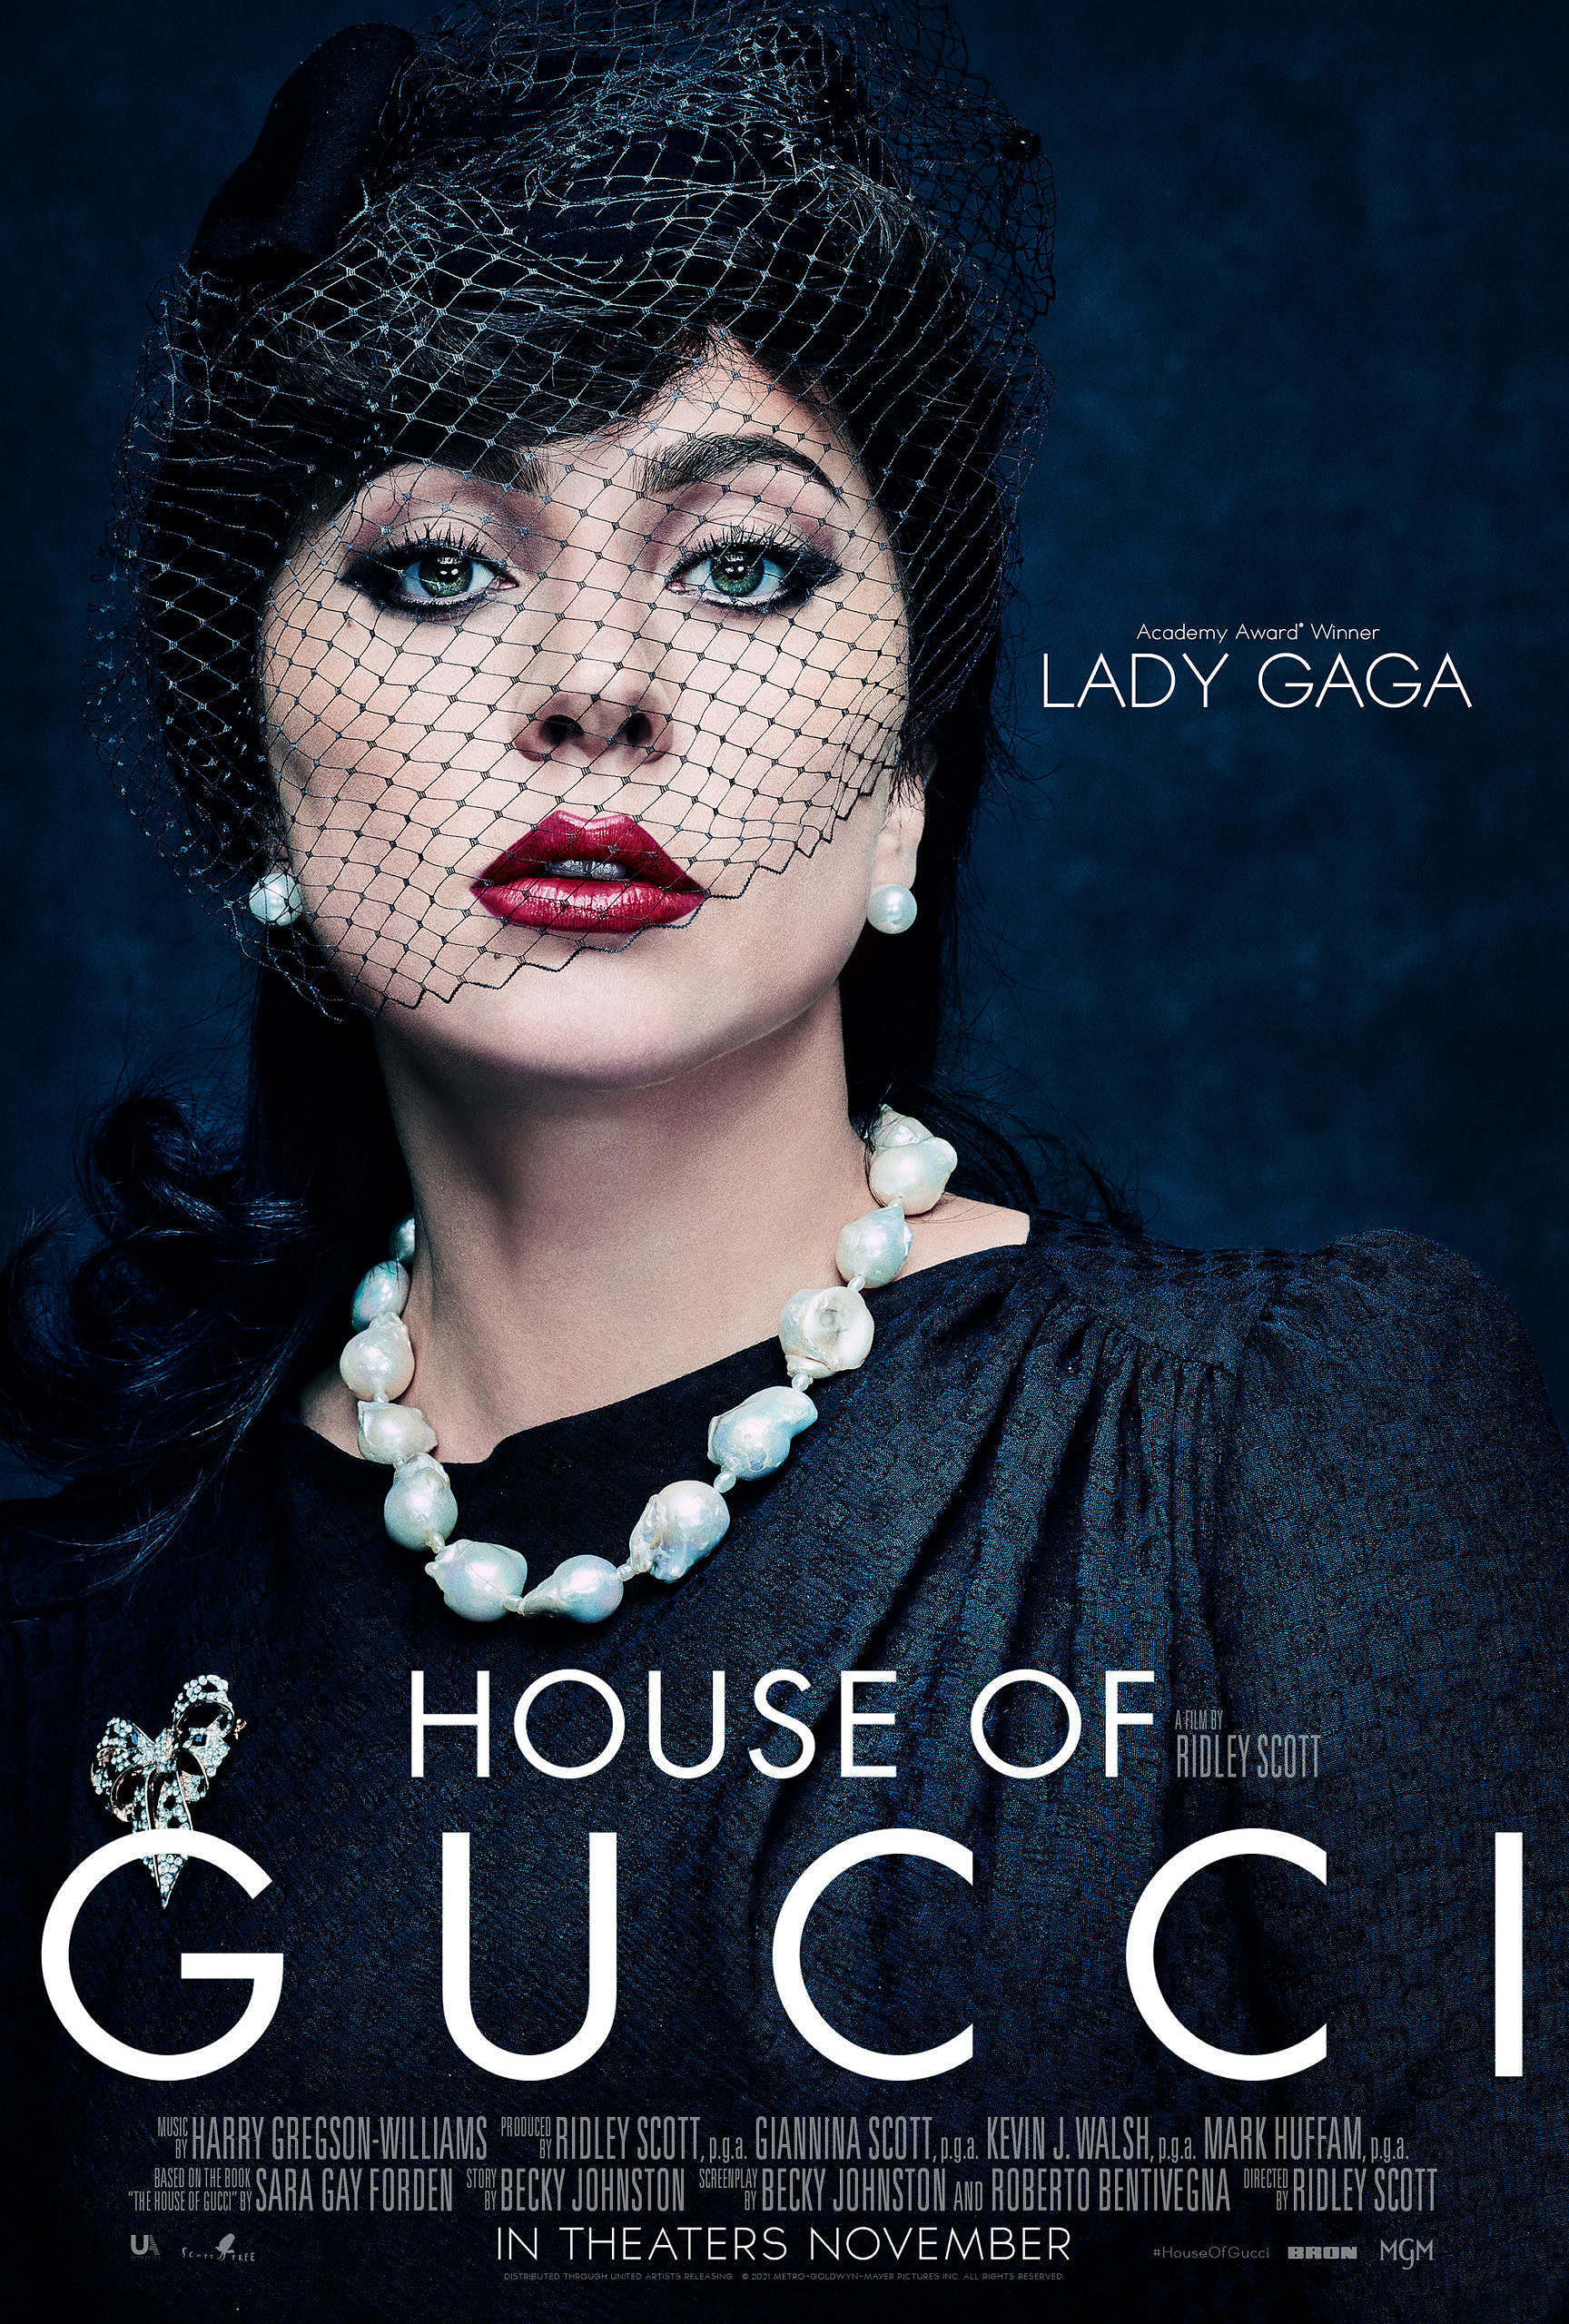 2nd Trailer For 'House Of Gucci' Movie